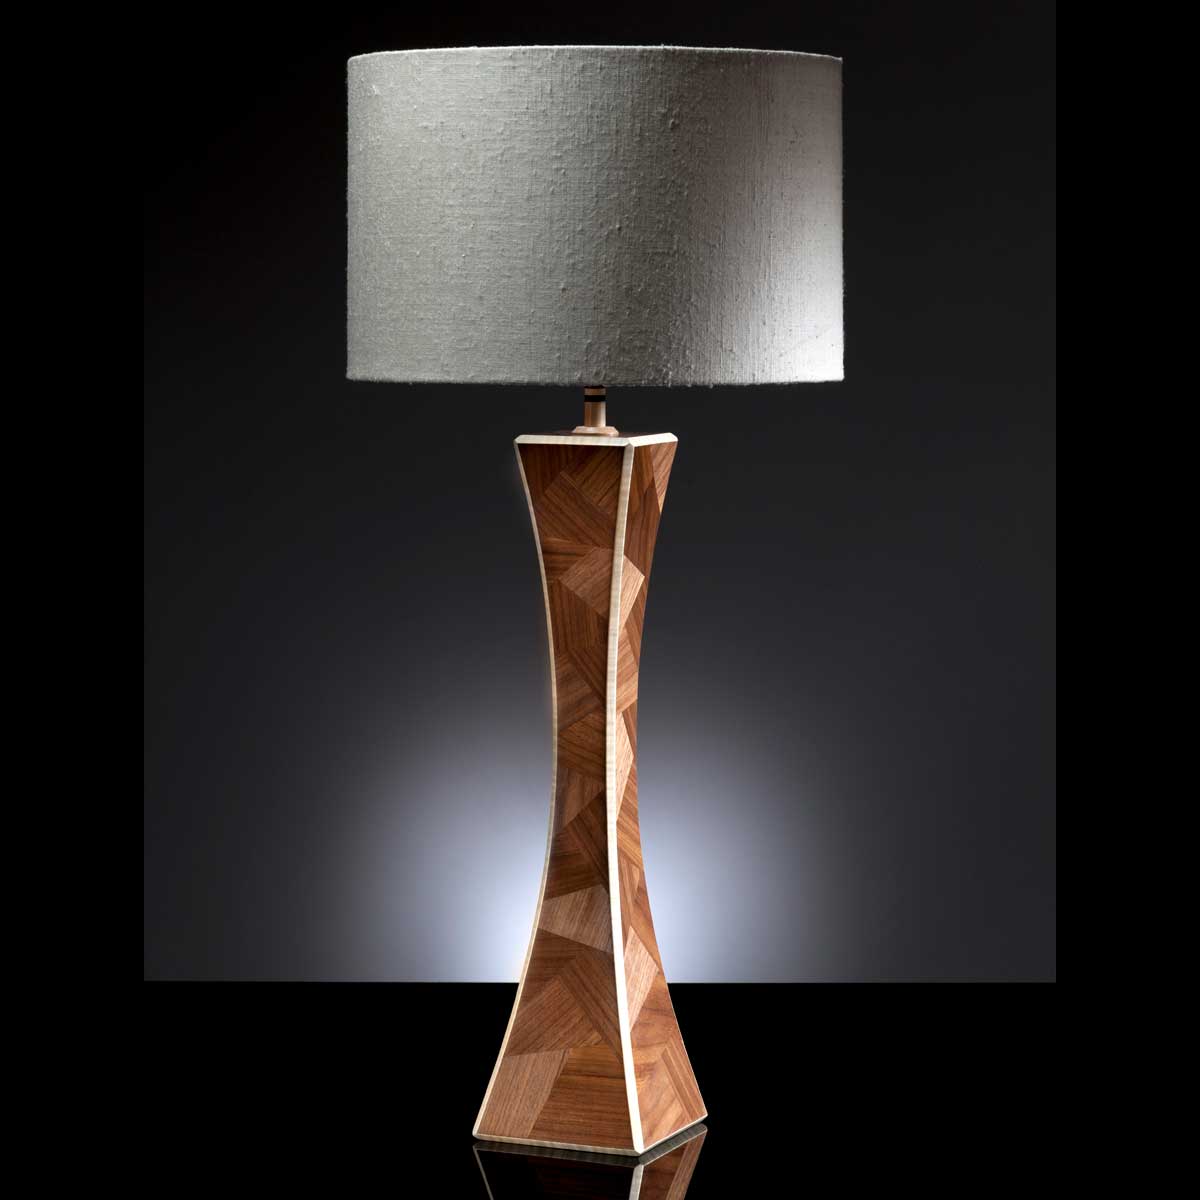 Artisan Abstract luxury table lamp made by Storm Furniture and sold by South Charlotte Fine Lighting